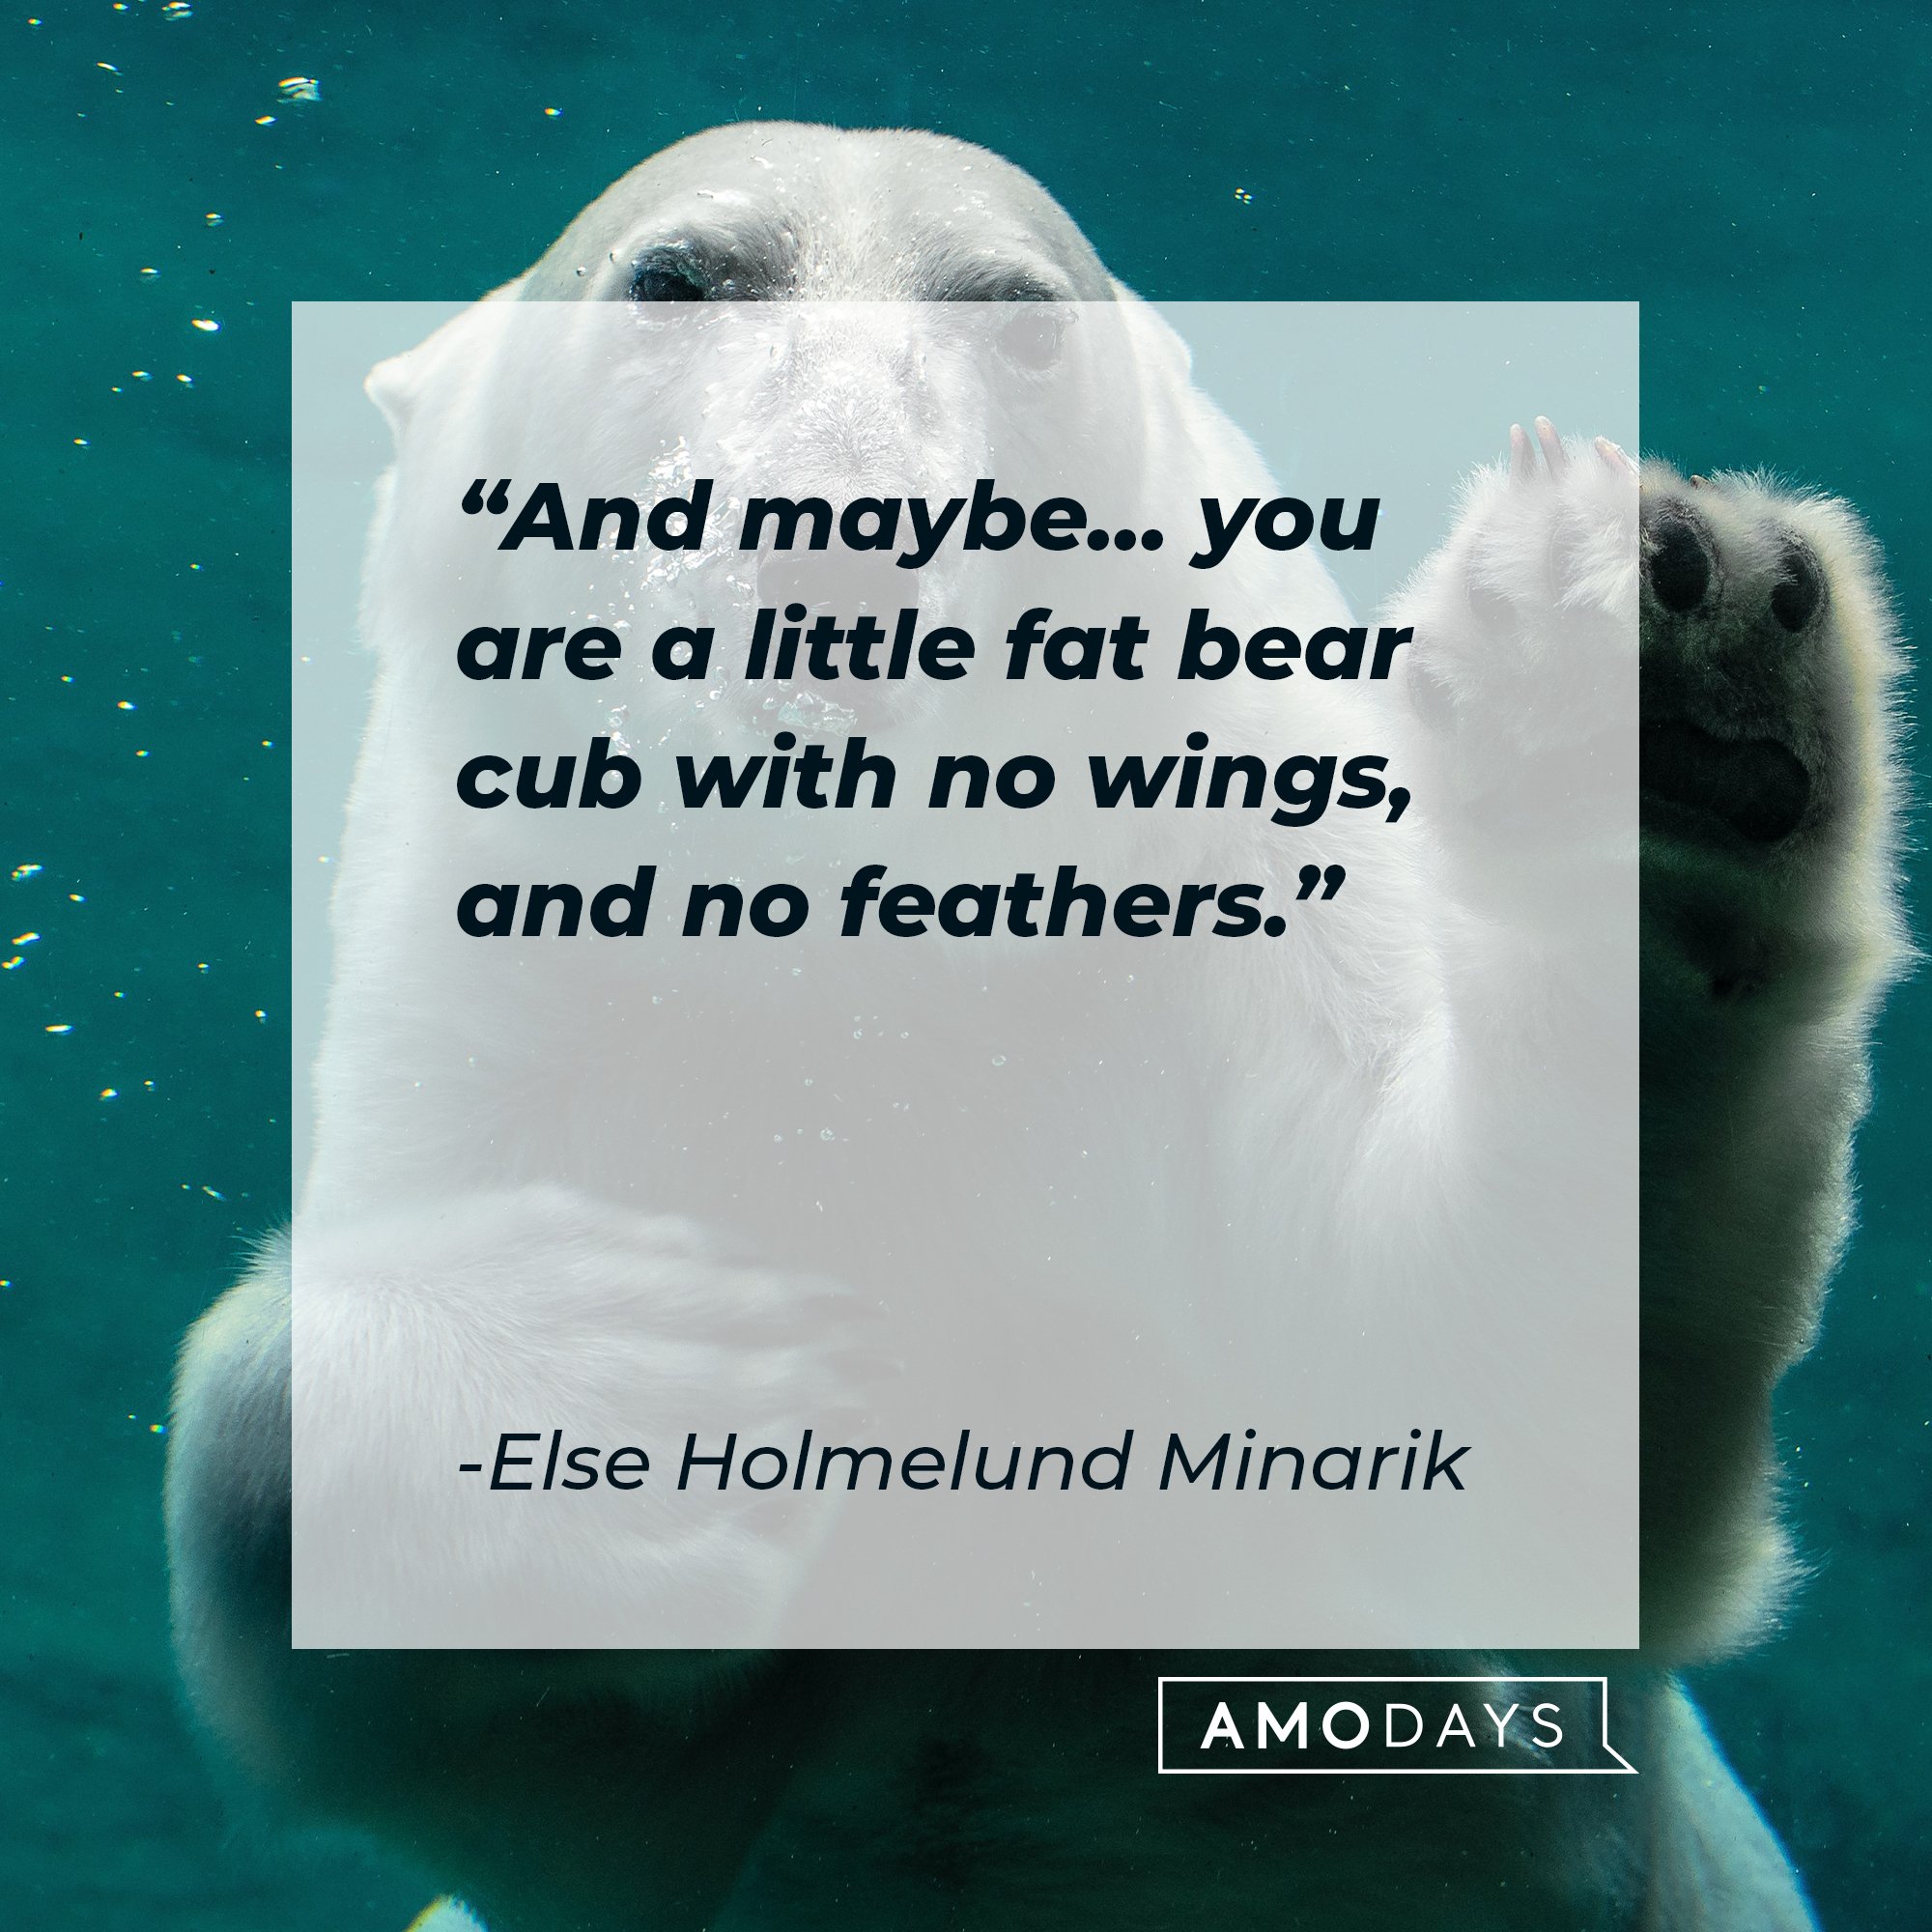 Else Holmelund Minarik’s quote: "And maybe... you are a little fat bear cub with no wings, and no feathers."  | Image: AmoDays